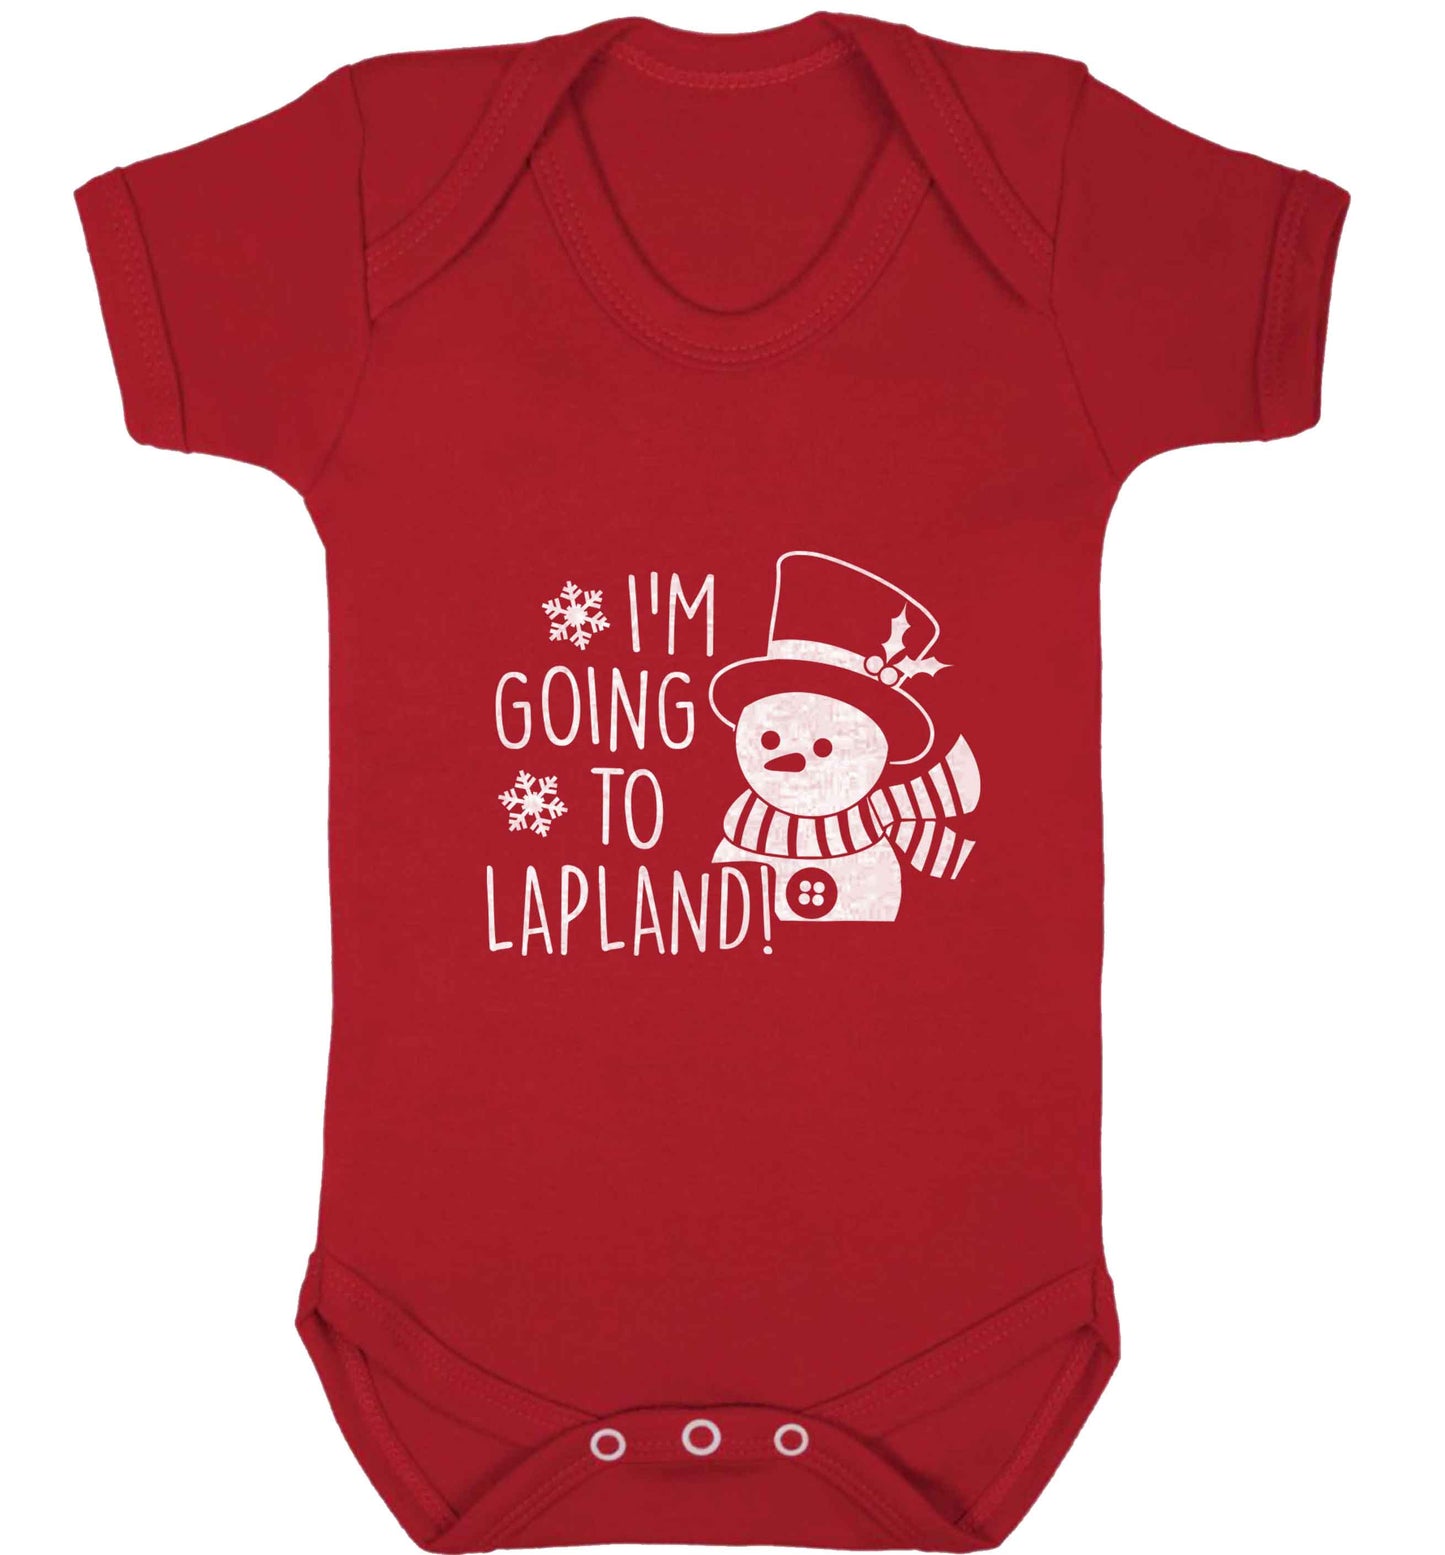 I'm going to Lapland baby vest red 18-24 months